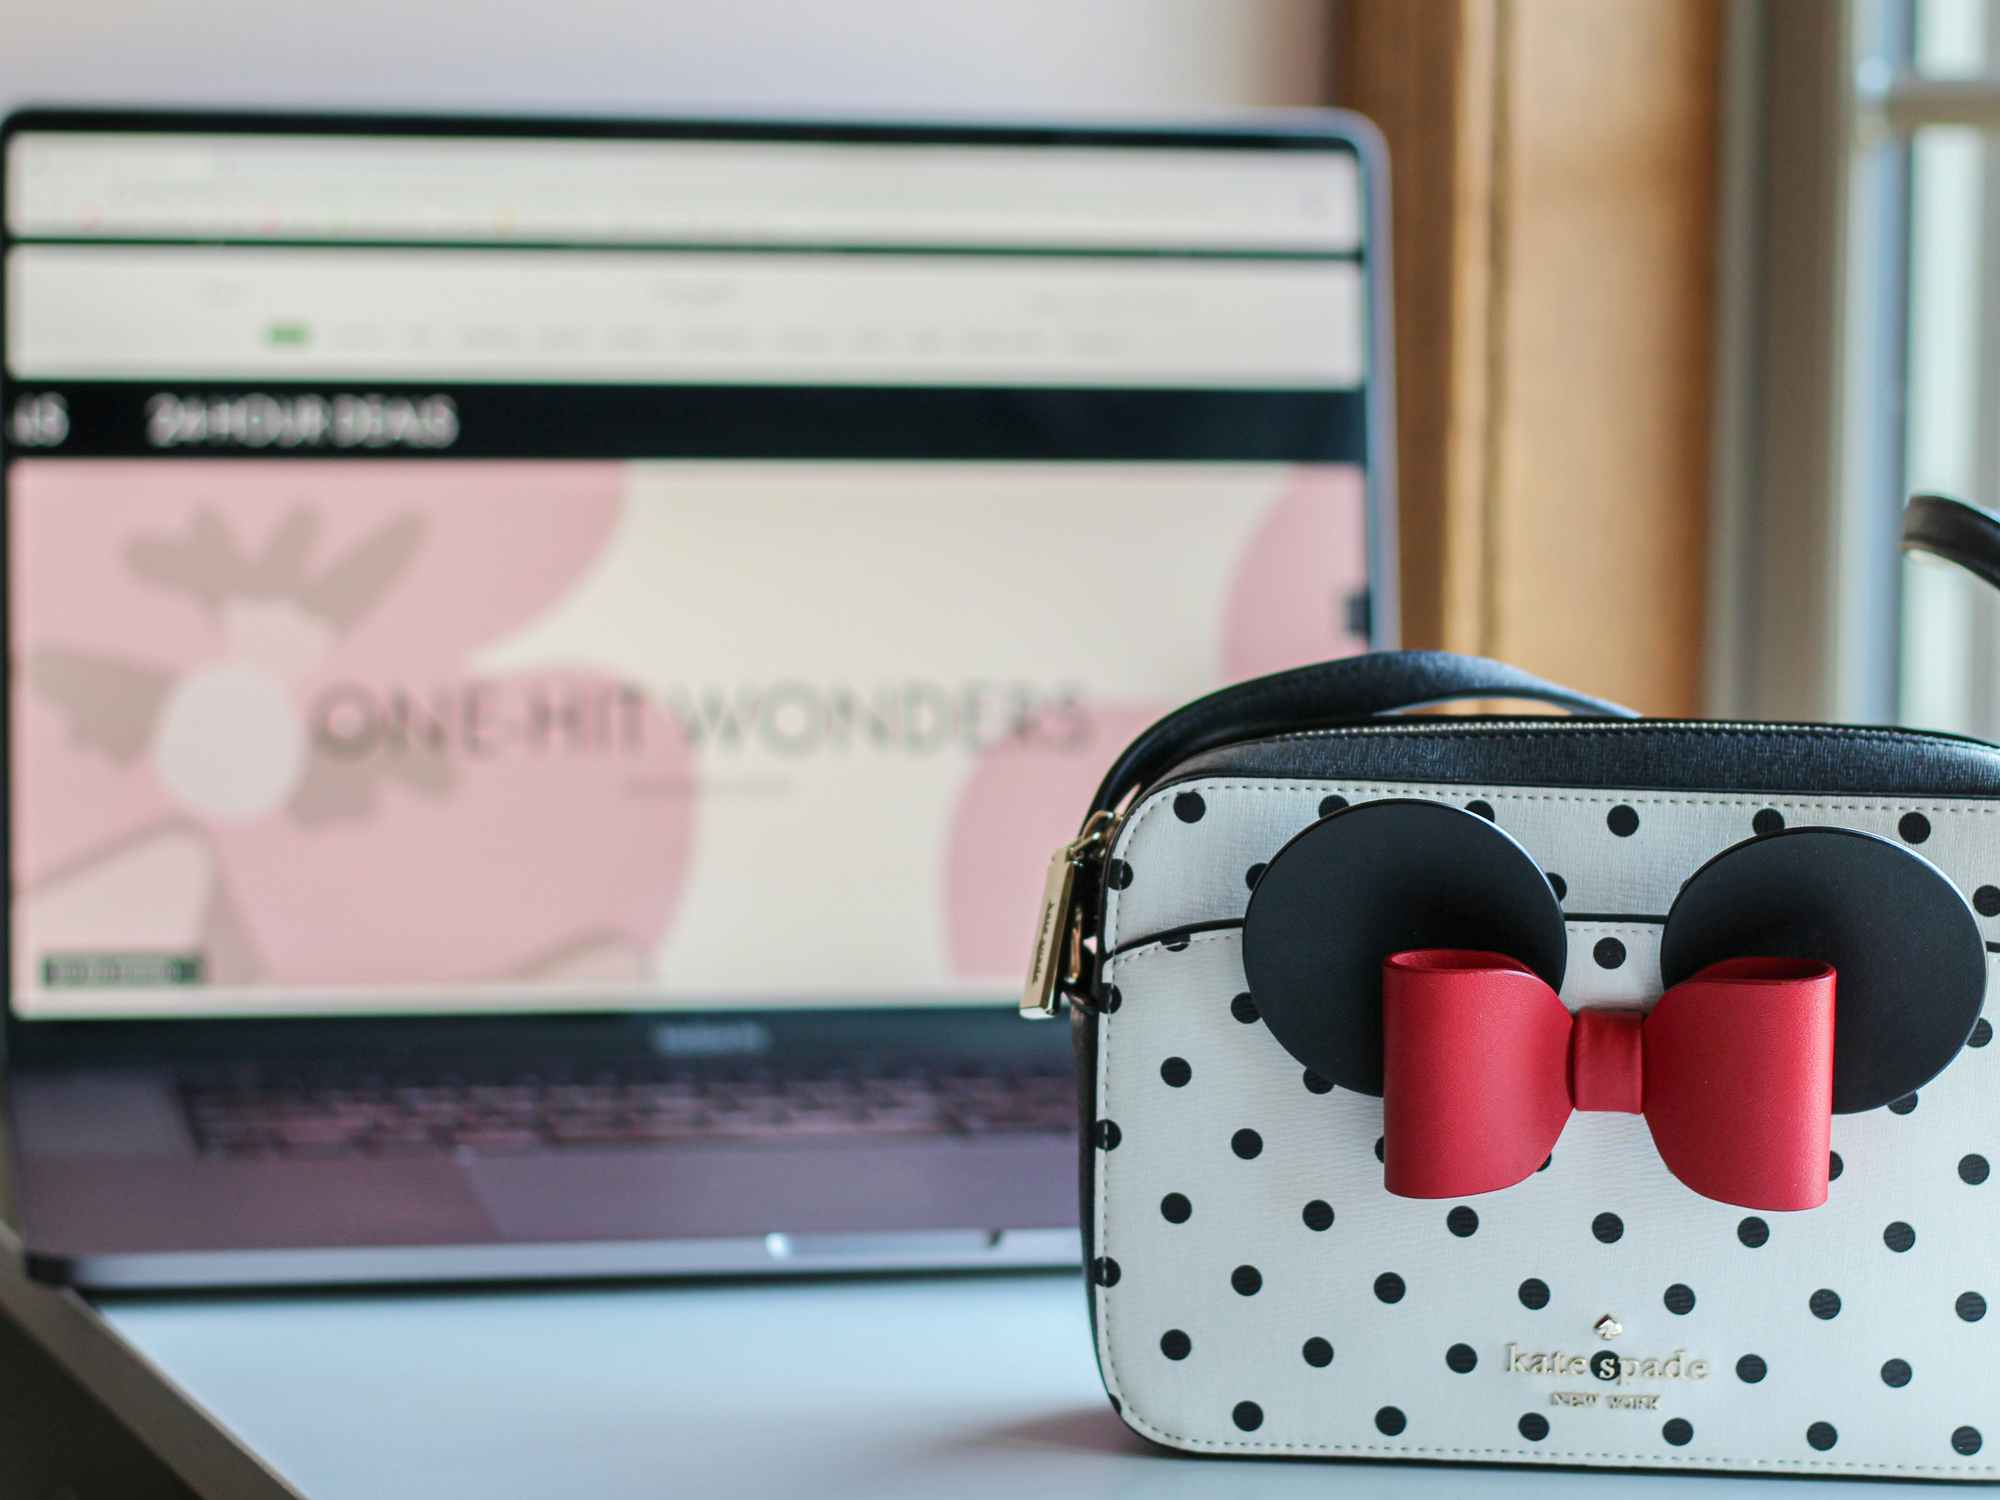 a kate spade purse sitting in front of a computer screen that has the kate spade website on it